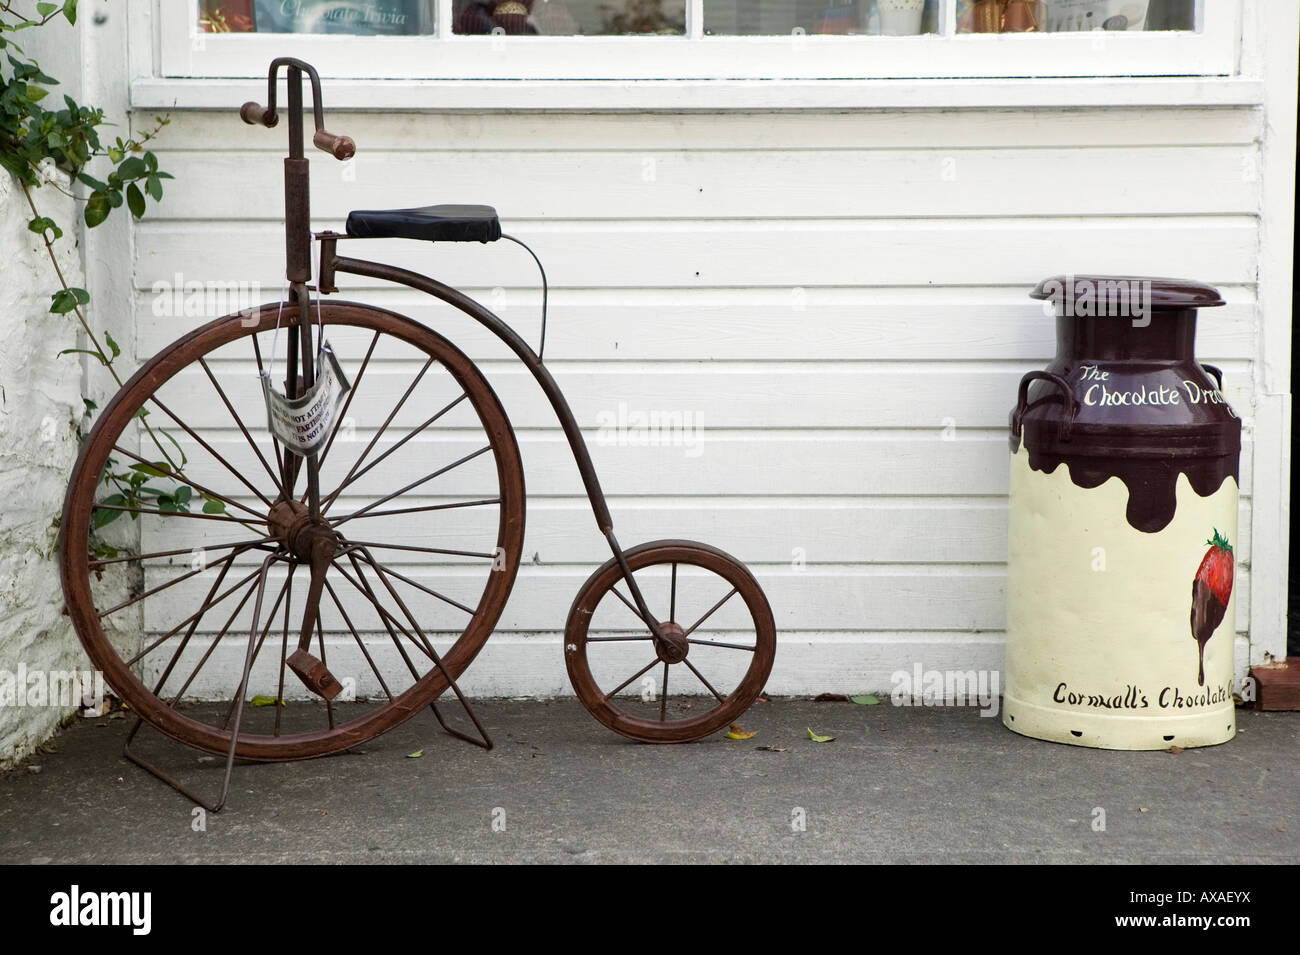 A Penny Farthing bicycle and milk churn outside a shop in Polperro, Cornwall Stock Photo